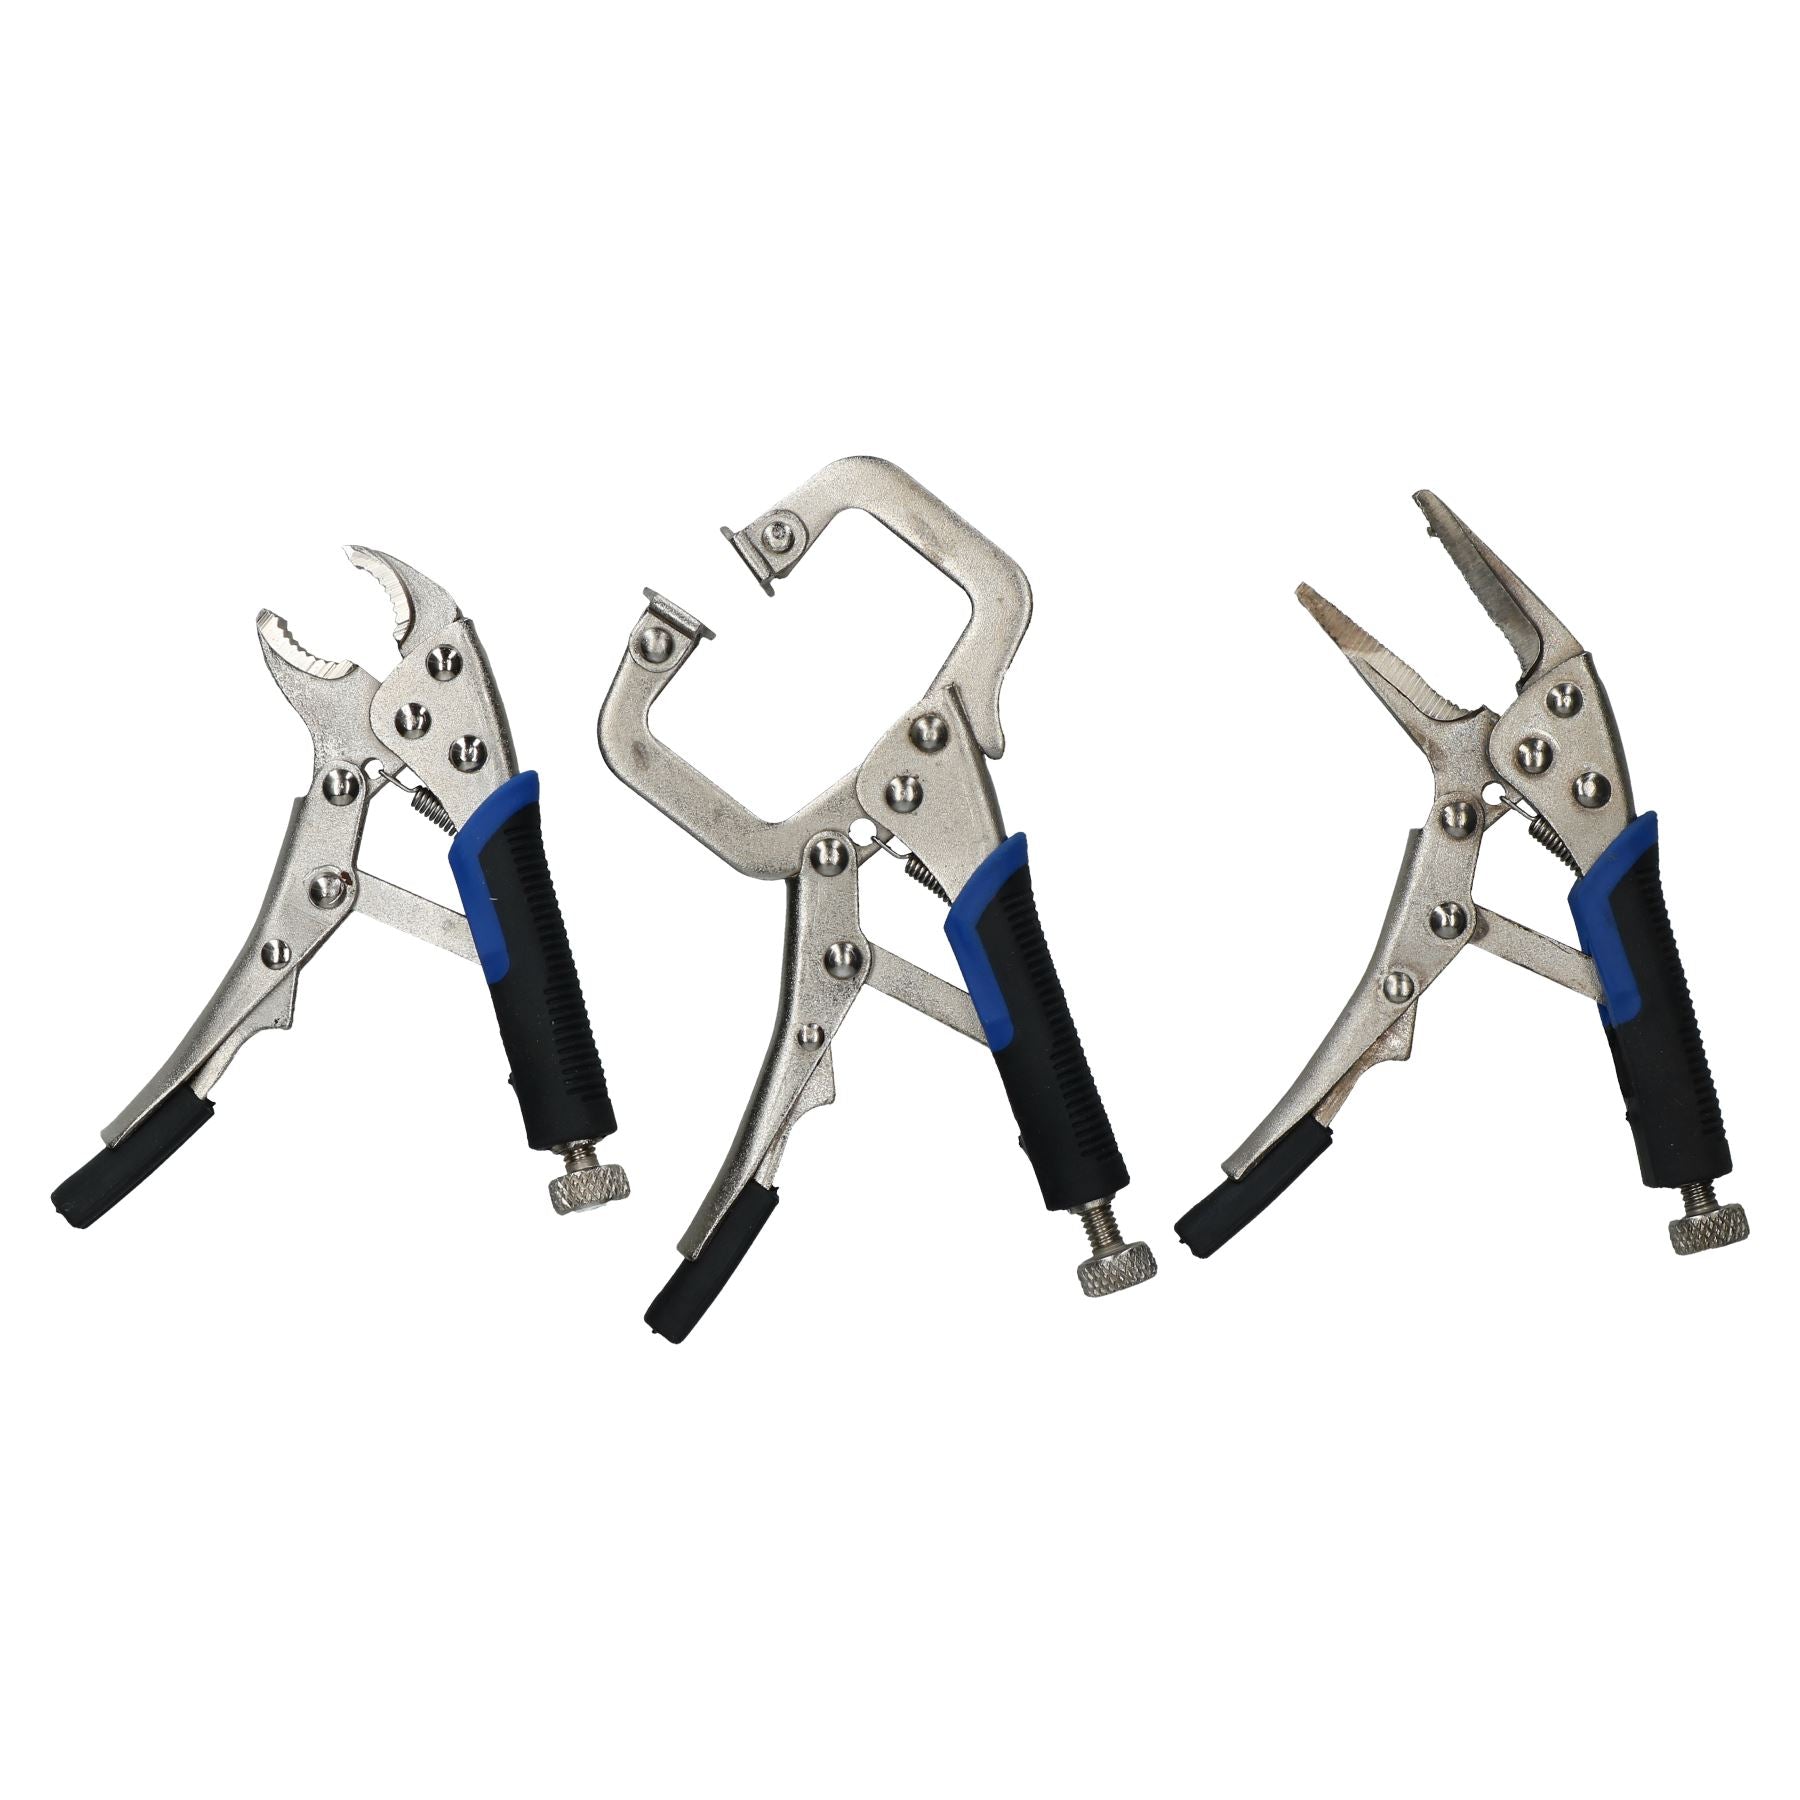 Mini Locking Pliers Clamp Mole Vice Grip Plier For Hobby Craft Welding 3pc Set